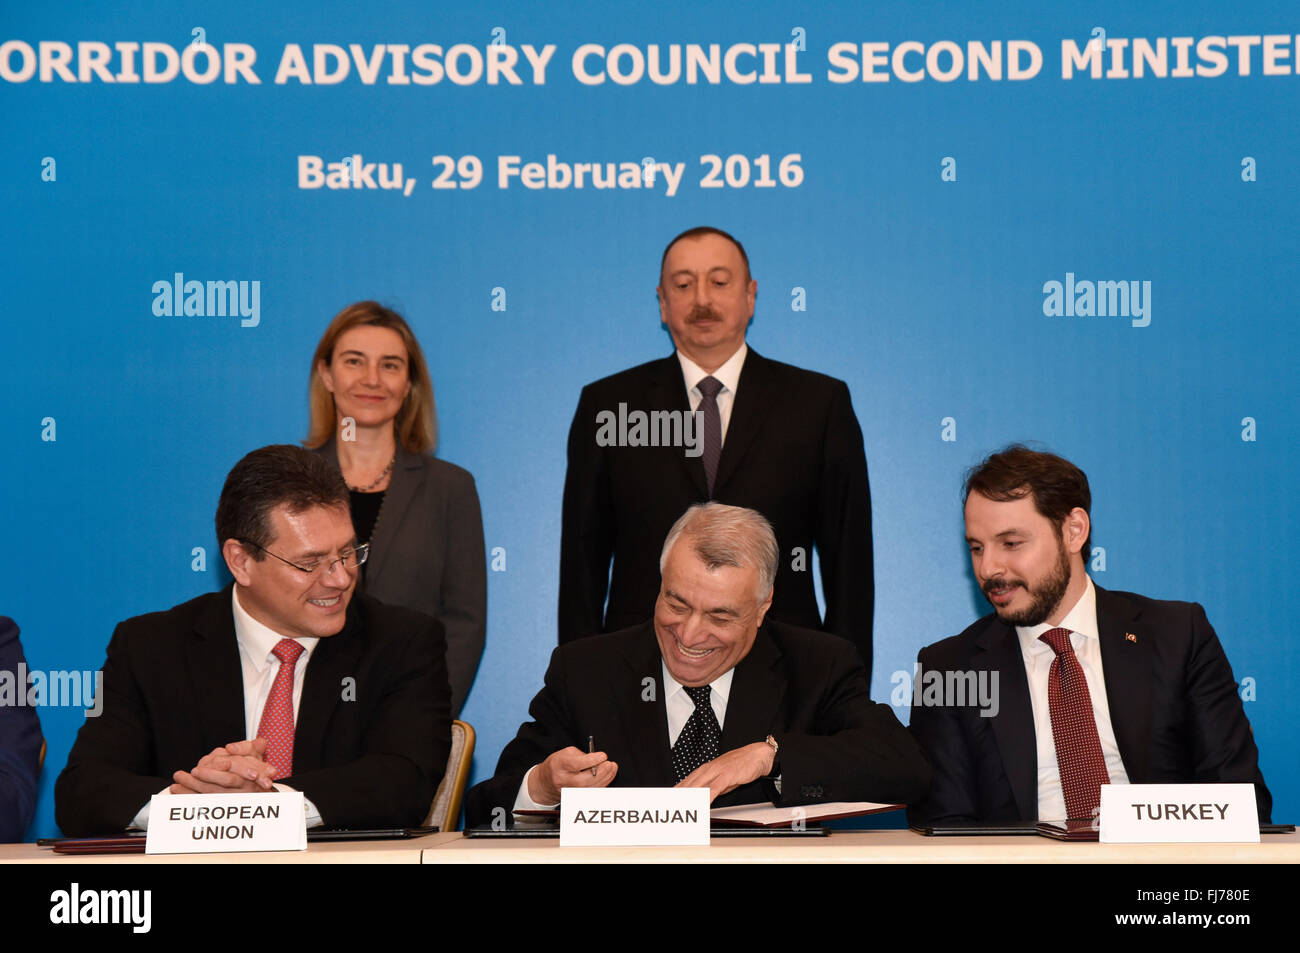 (160229) -- BAKU, Feb. 29, 2016 (Xinhua) -- Maros Sefkovic (Front-L), Vice President of the European Commission, Natig Aliyev (Front-C), Azerbaijan Minister of Energy and Berat Albayrak (Front-R), Turkish Minister of Energy and Natural Resources, attend the second Southern Gas Corridor Advisory Council meeting in Baku, Azerbaijan, on Feb 29, 2016. The Southern Gas Corridor (SGC) countries on Monday pledged to further their cooperation to secure reliable, consistent gas supplies from Azerbaijan to the European markets. The joint statement was made after the seconding meeting of the SGC Advisory Stock Photo